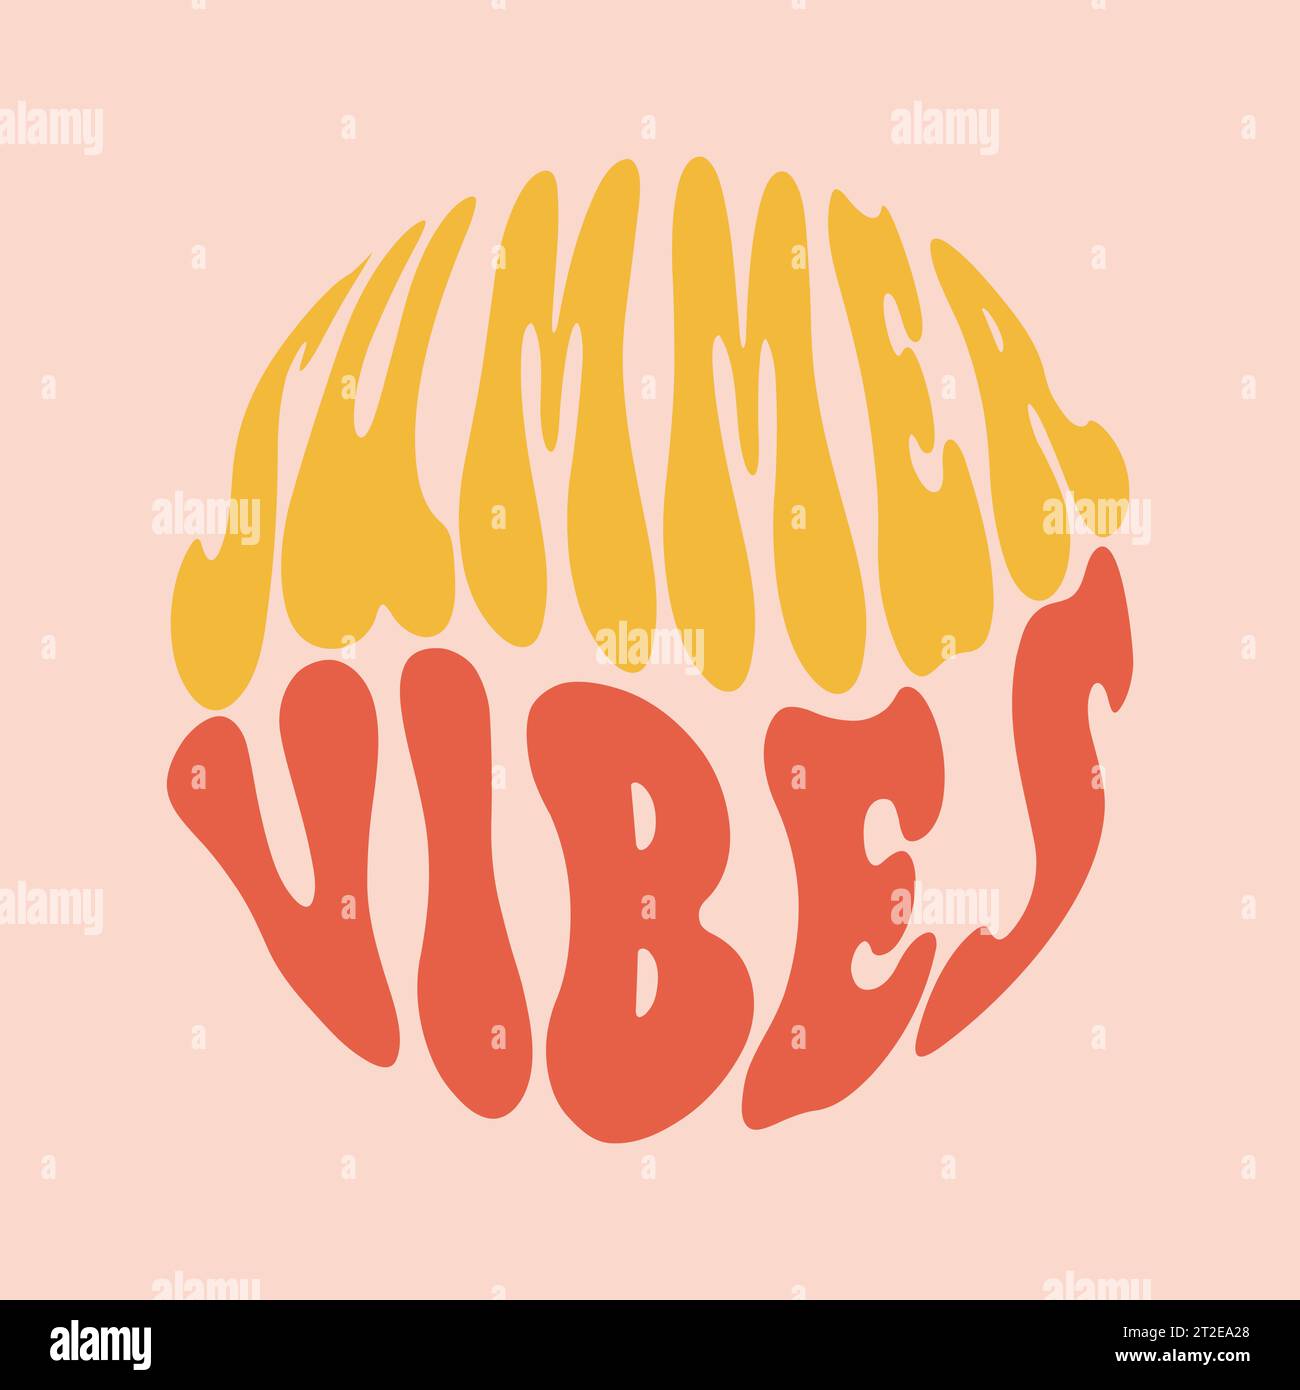 Summer vibes poster design. Positive quote in handwritten retro style. 70s vintage vibes Stock Vector